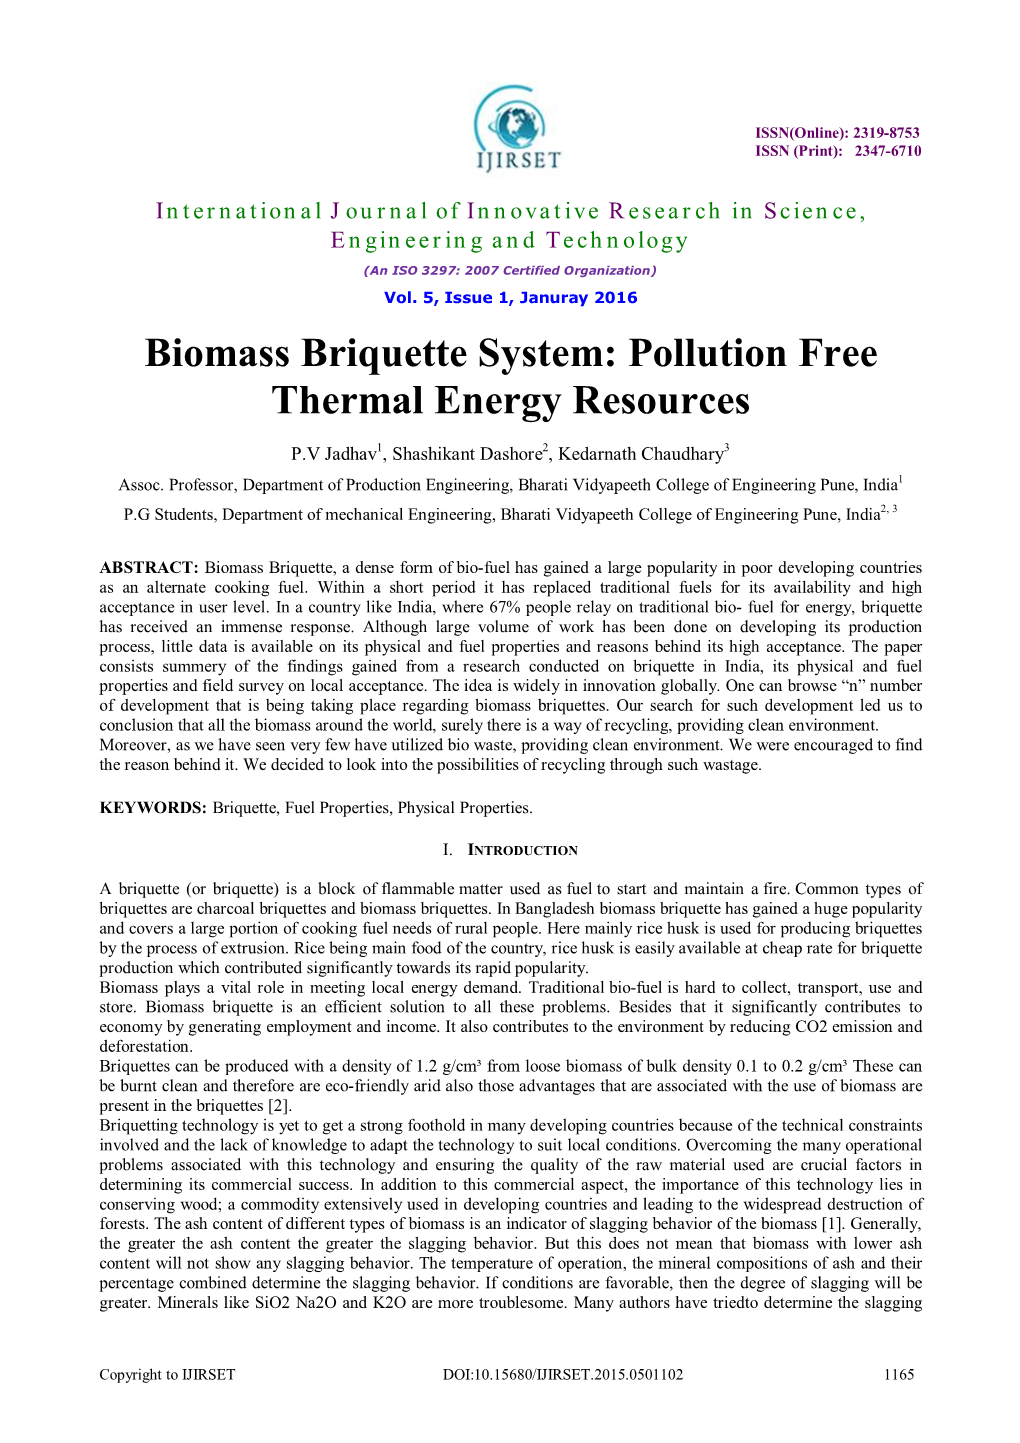 Biomass Briquette System: Pollution Free Thermal Energy Resources